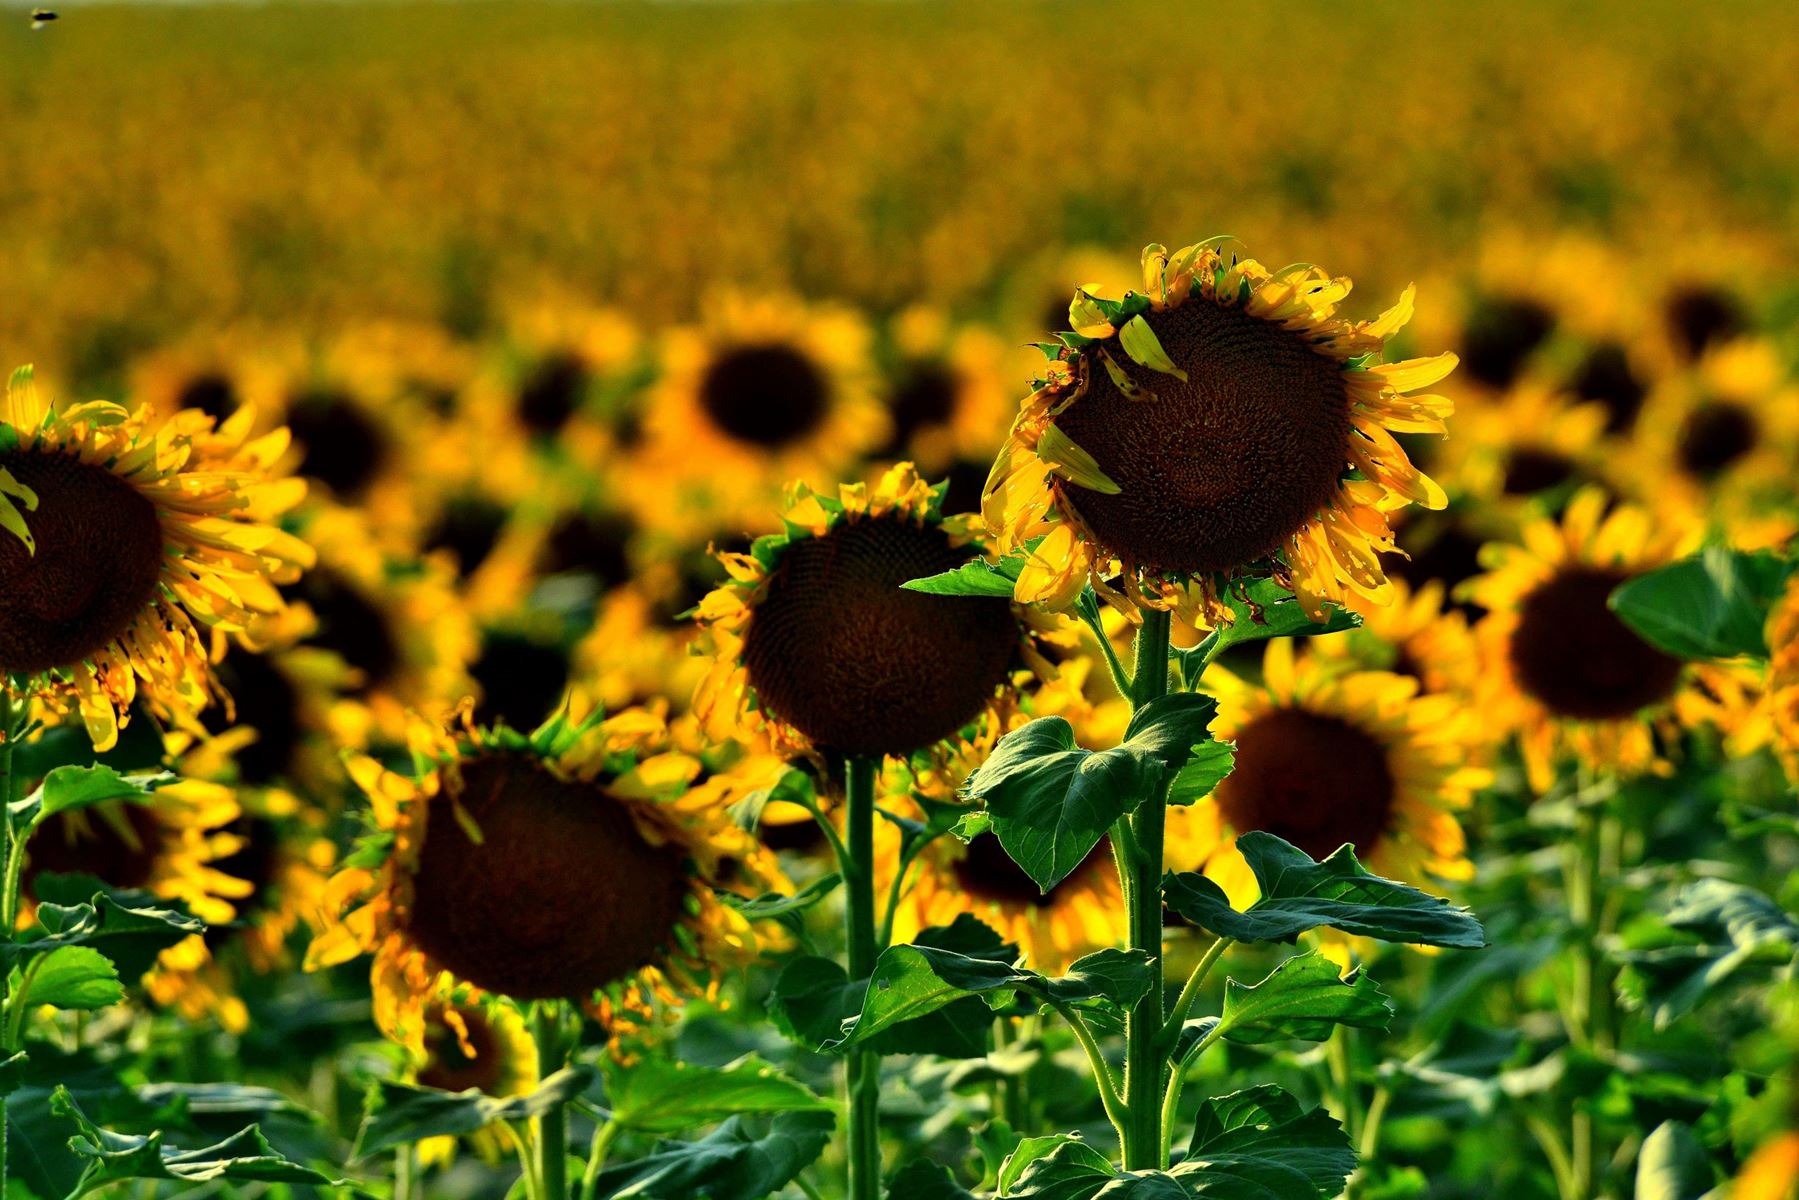 Closeup of yellow sunflowers in a field